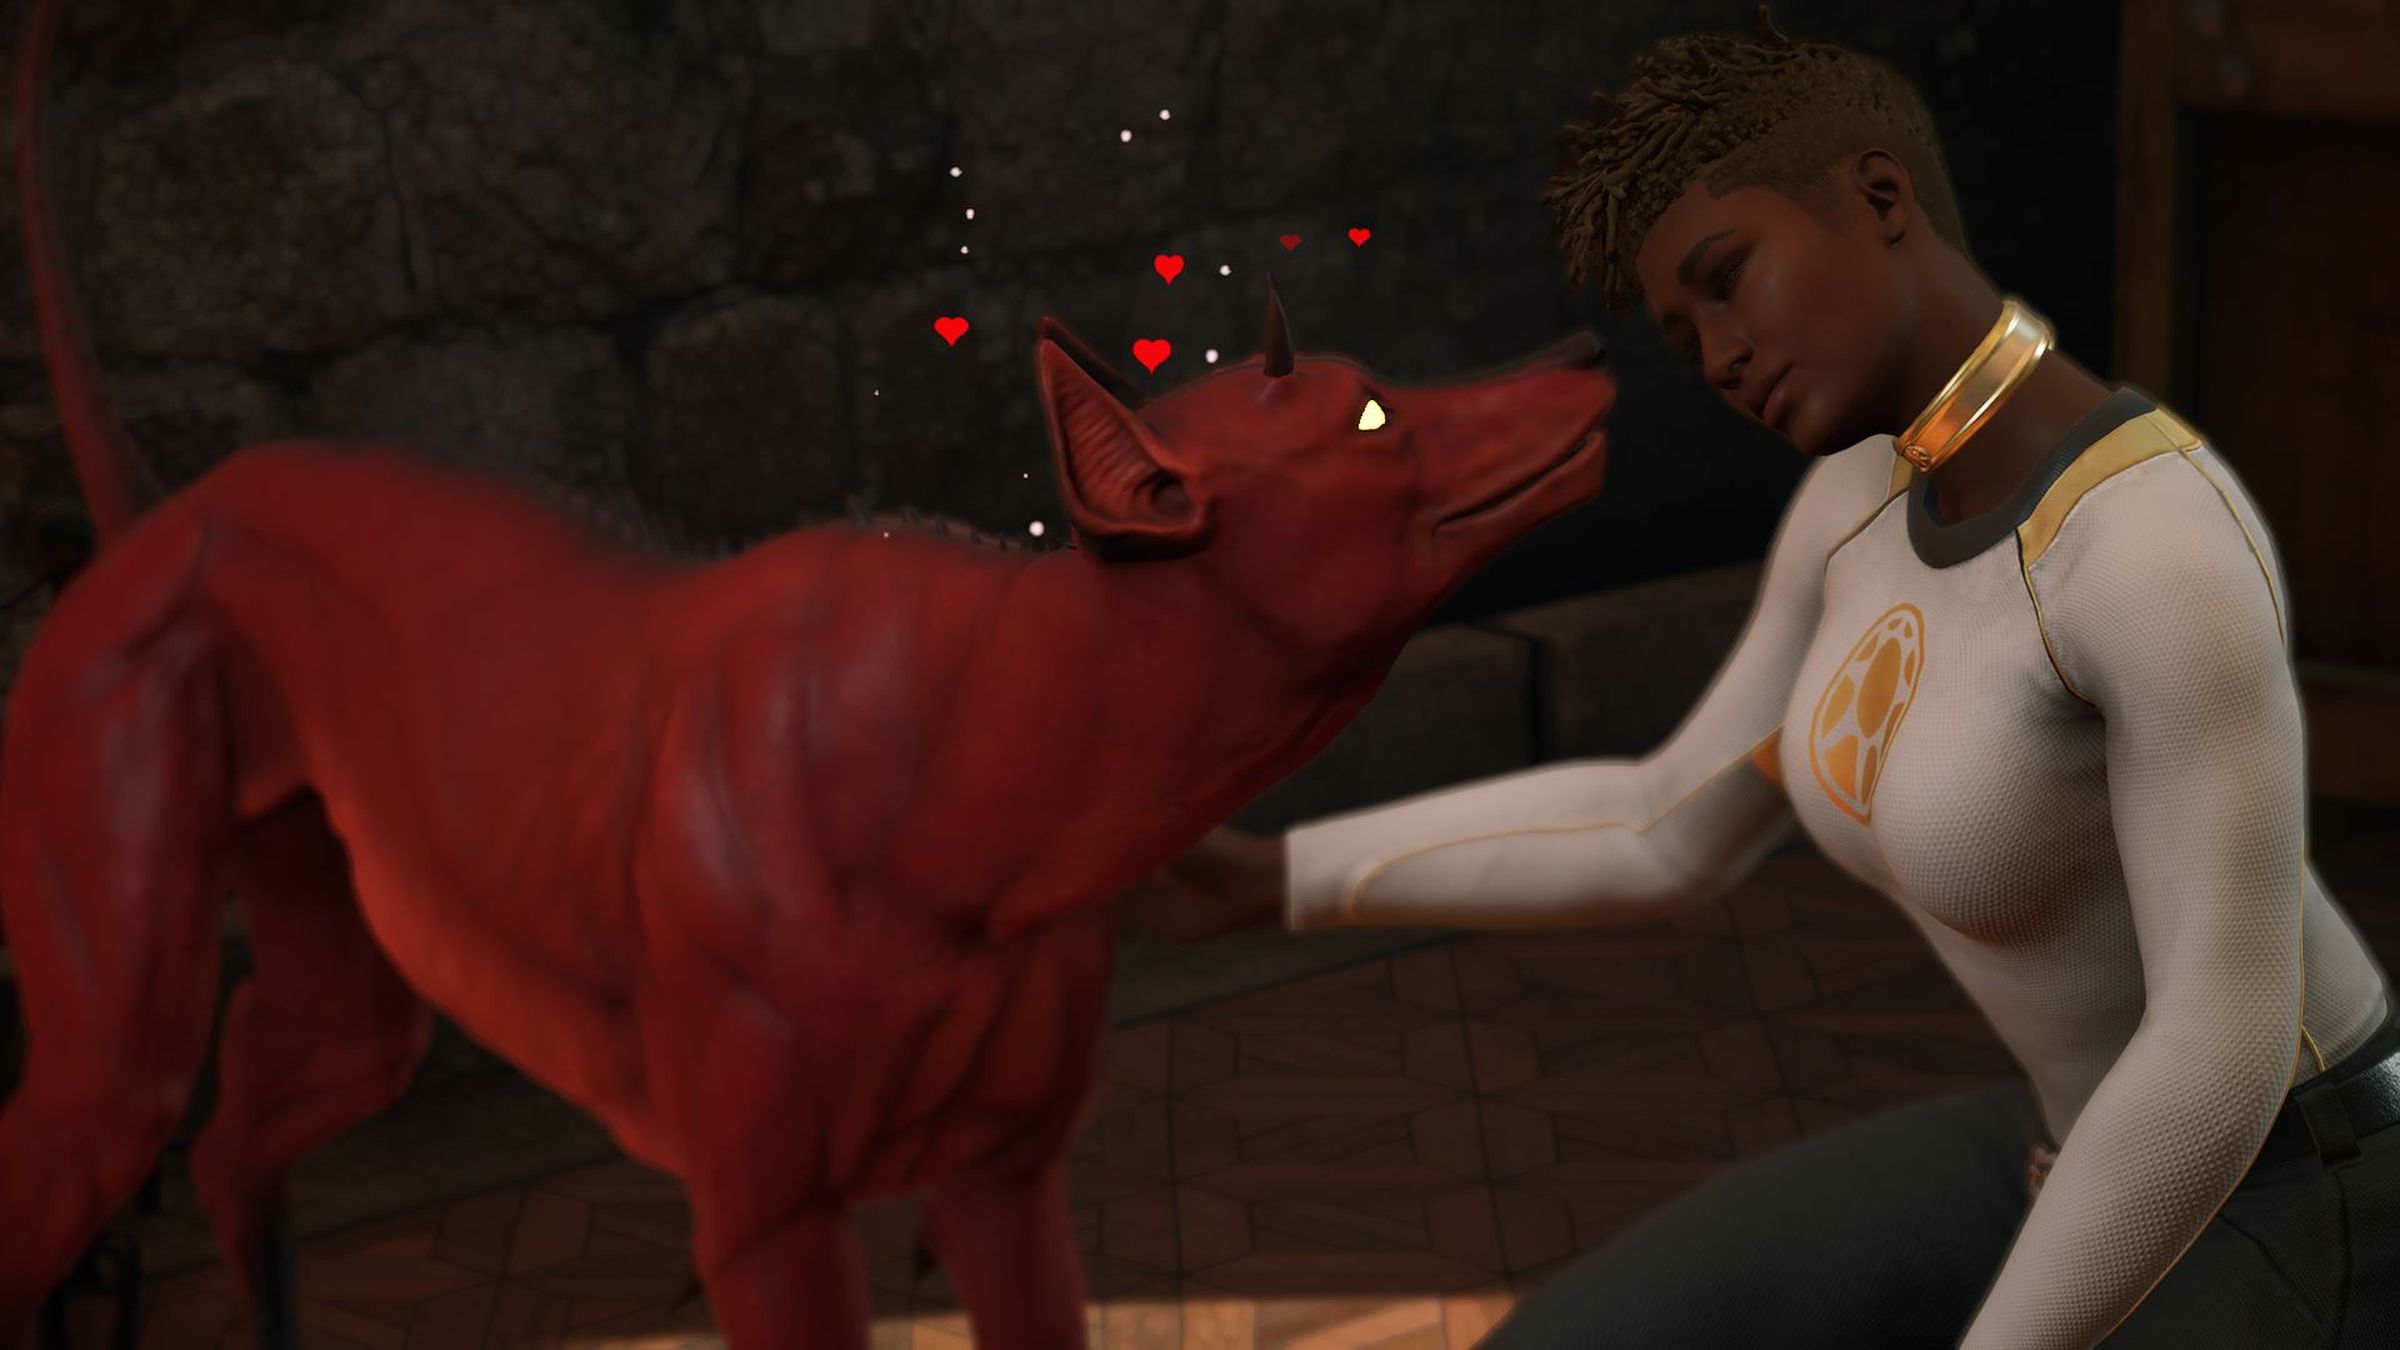 Screenshot from Midnight Suns featuring the Hunter player character petting a red demonic dog with horns as hearts bubble between them